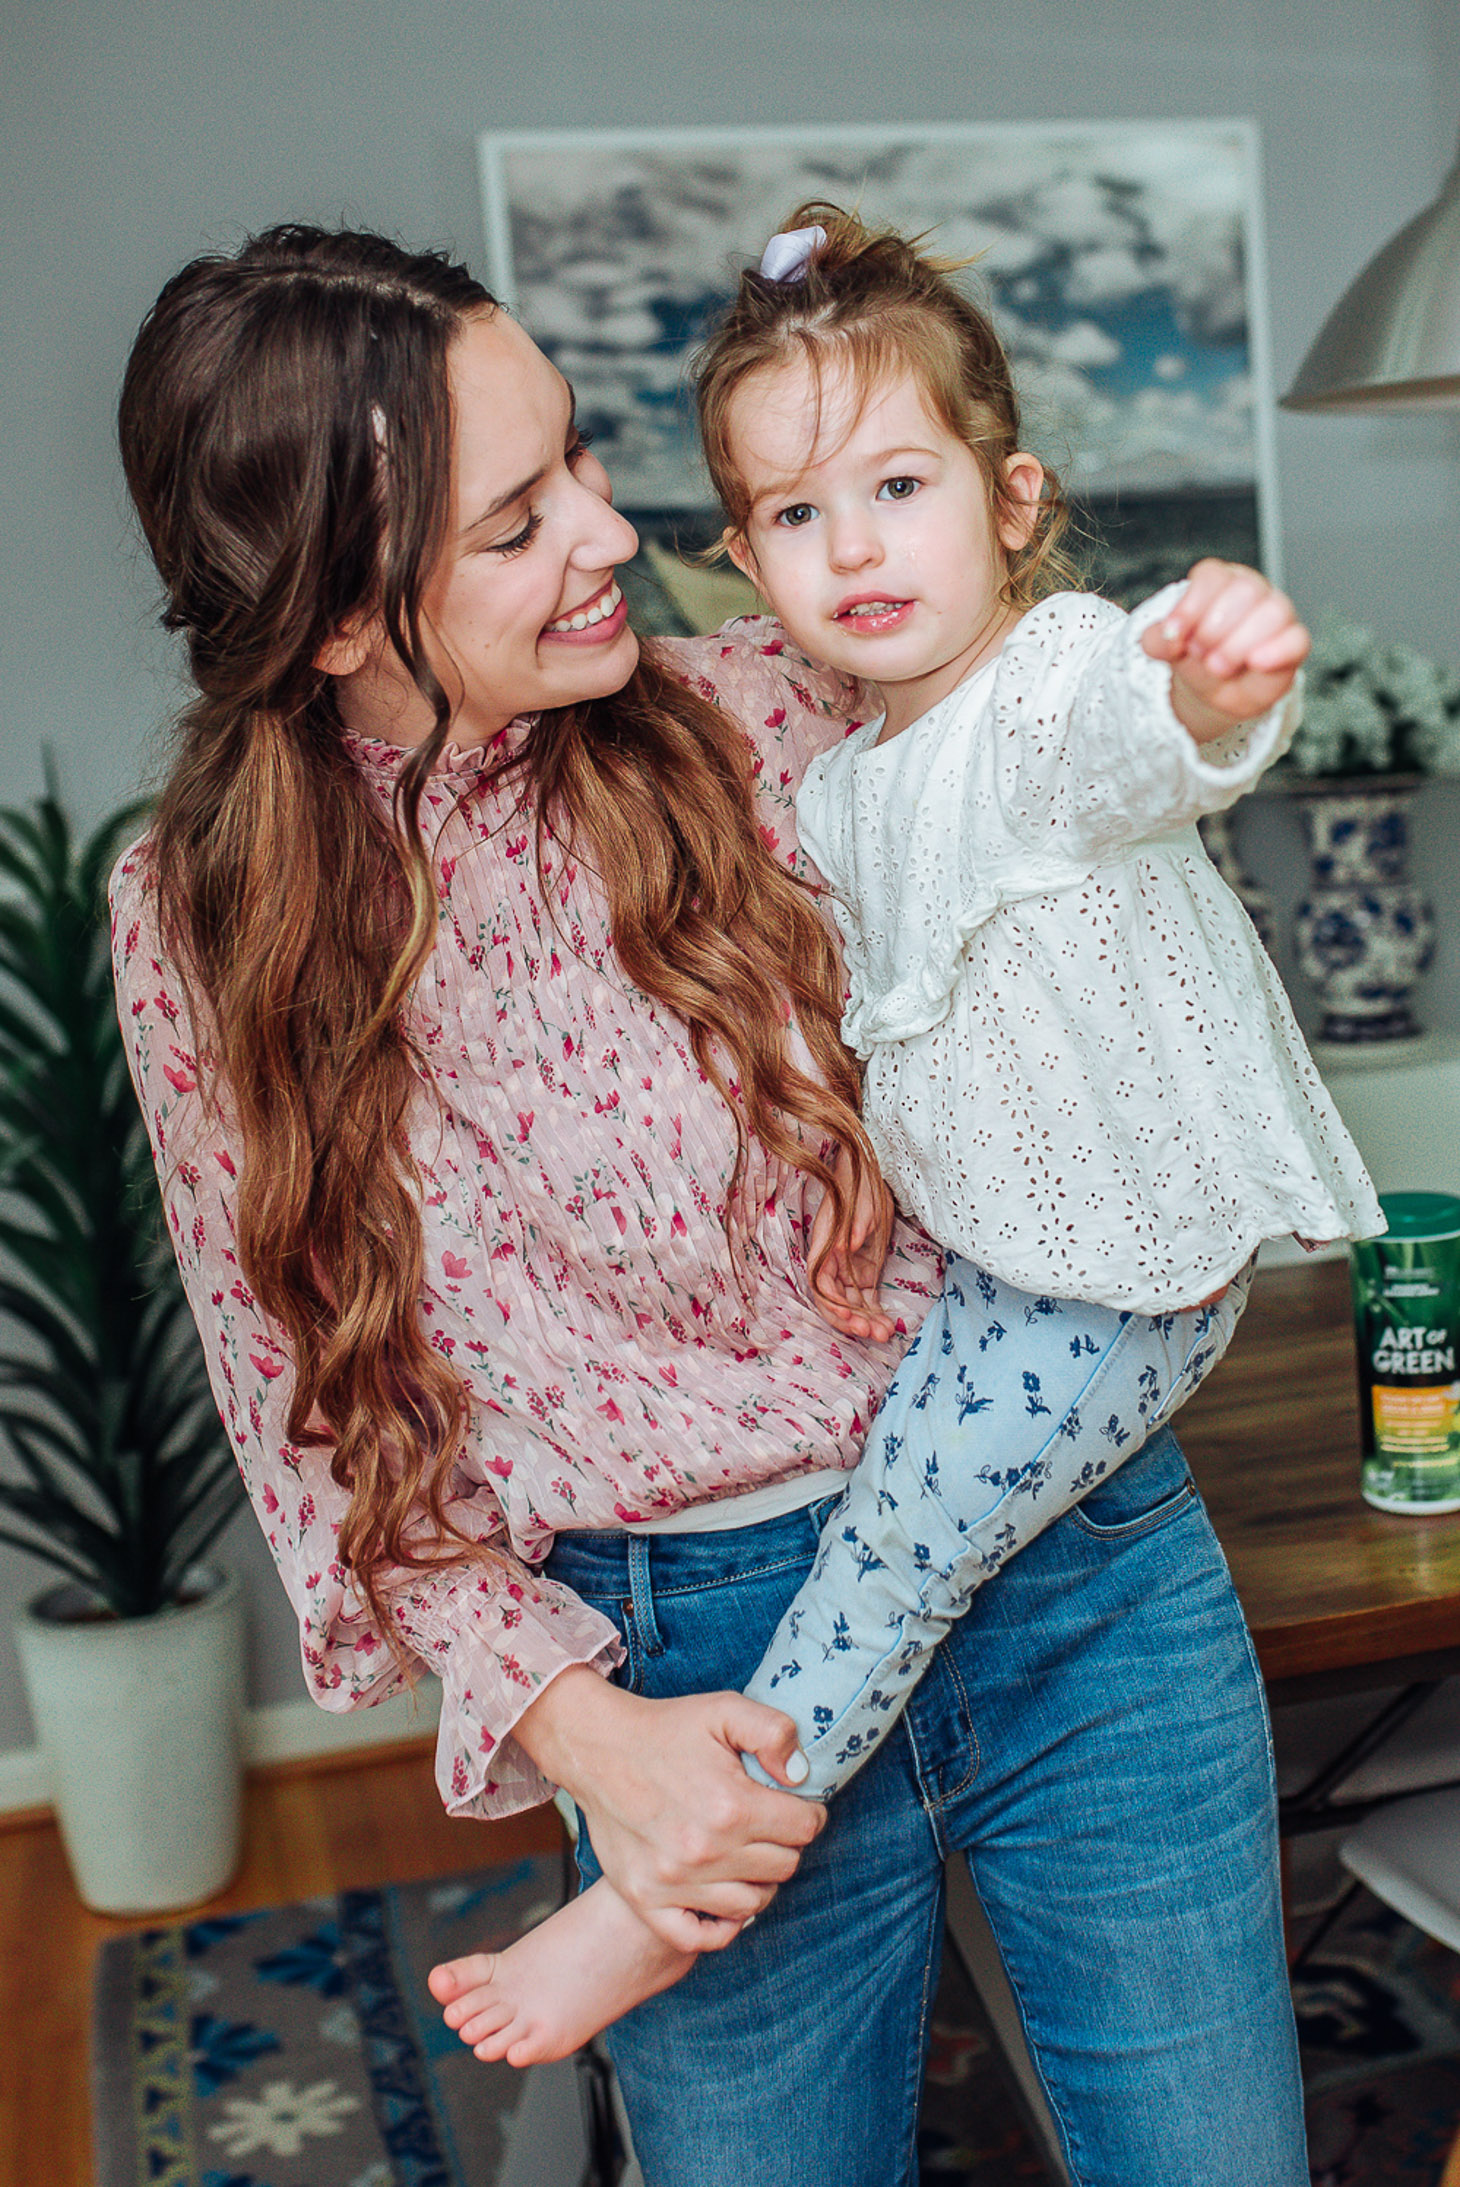 Essential Green Spring Cleaning Tips featured by top US lifestyle blog, Lone Star Looking Glass: image of a woman with her toddler